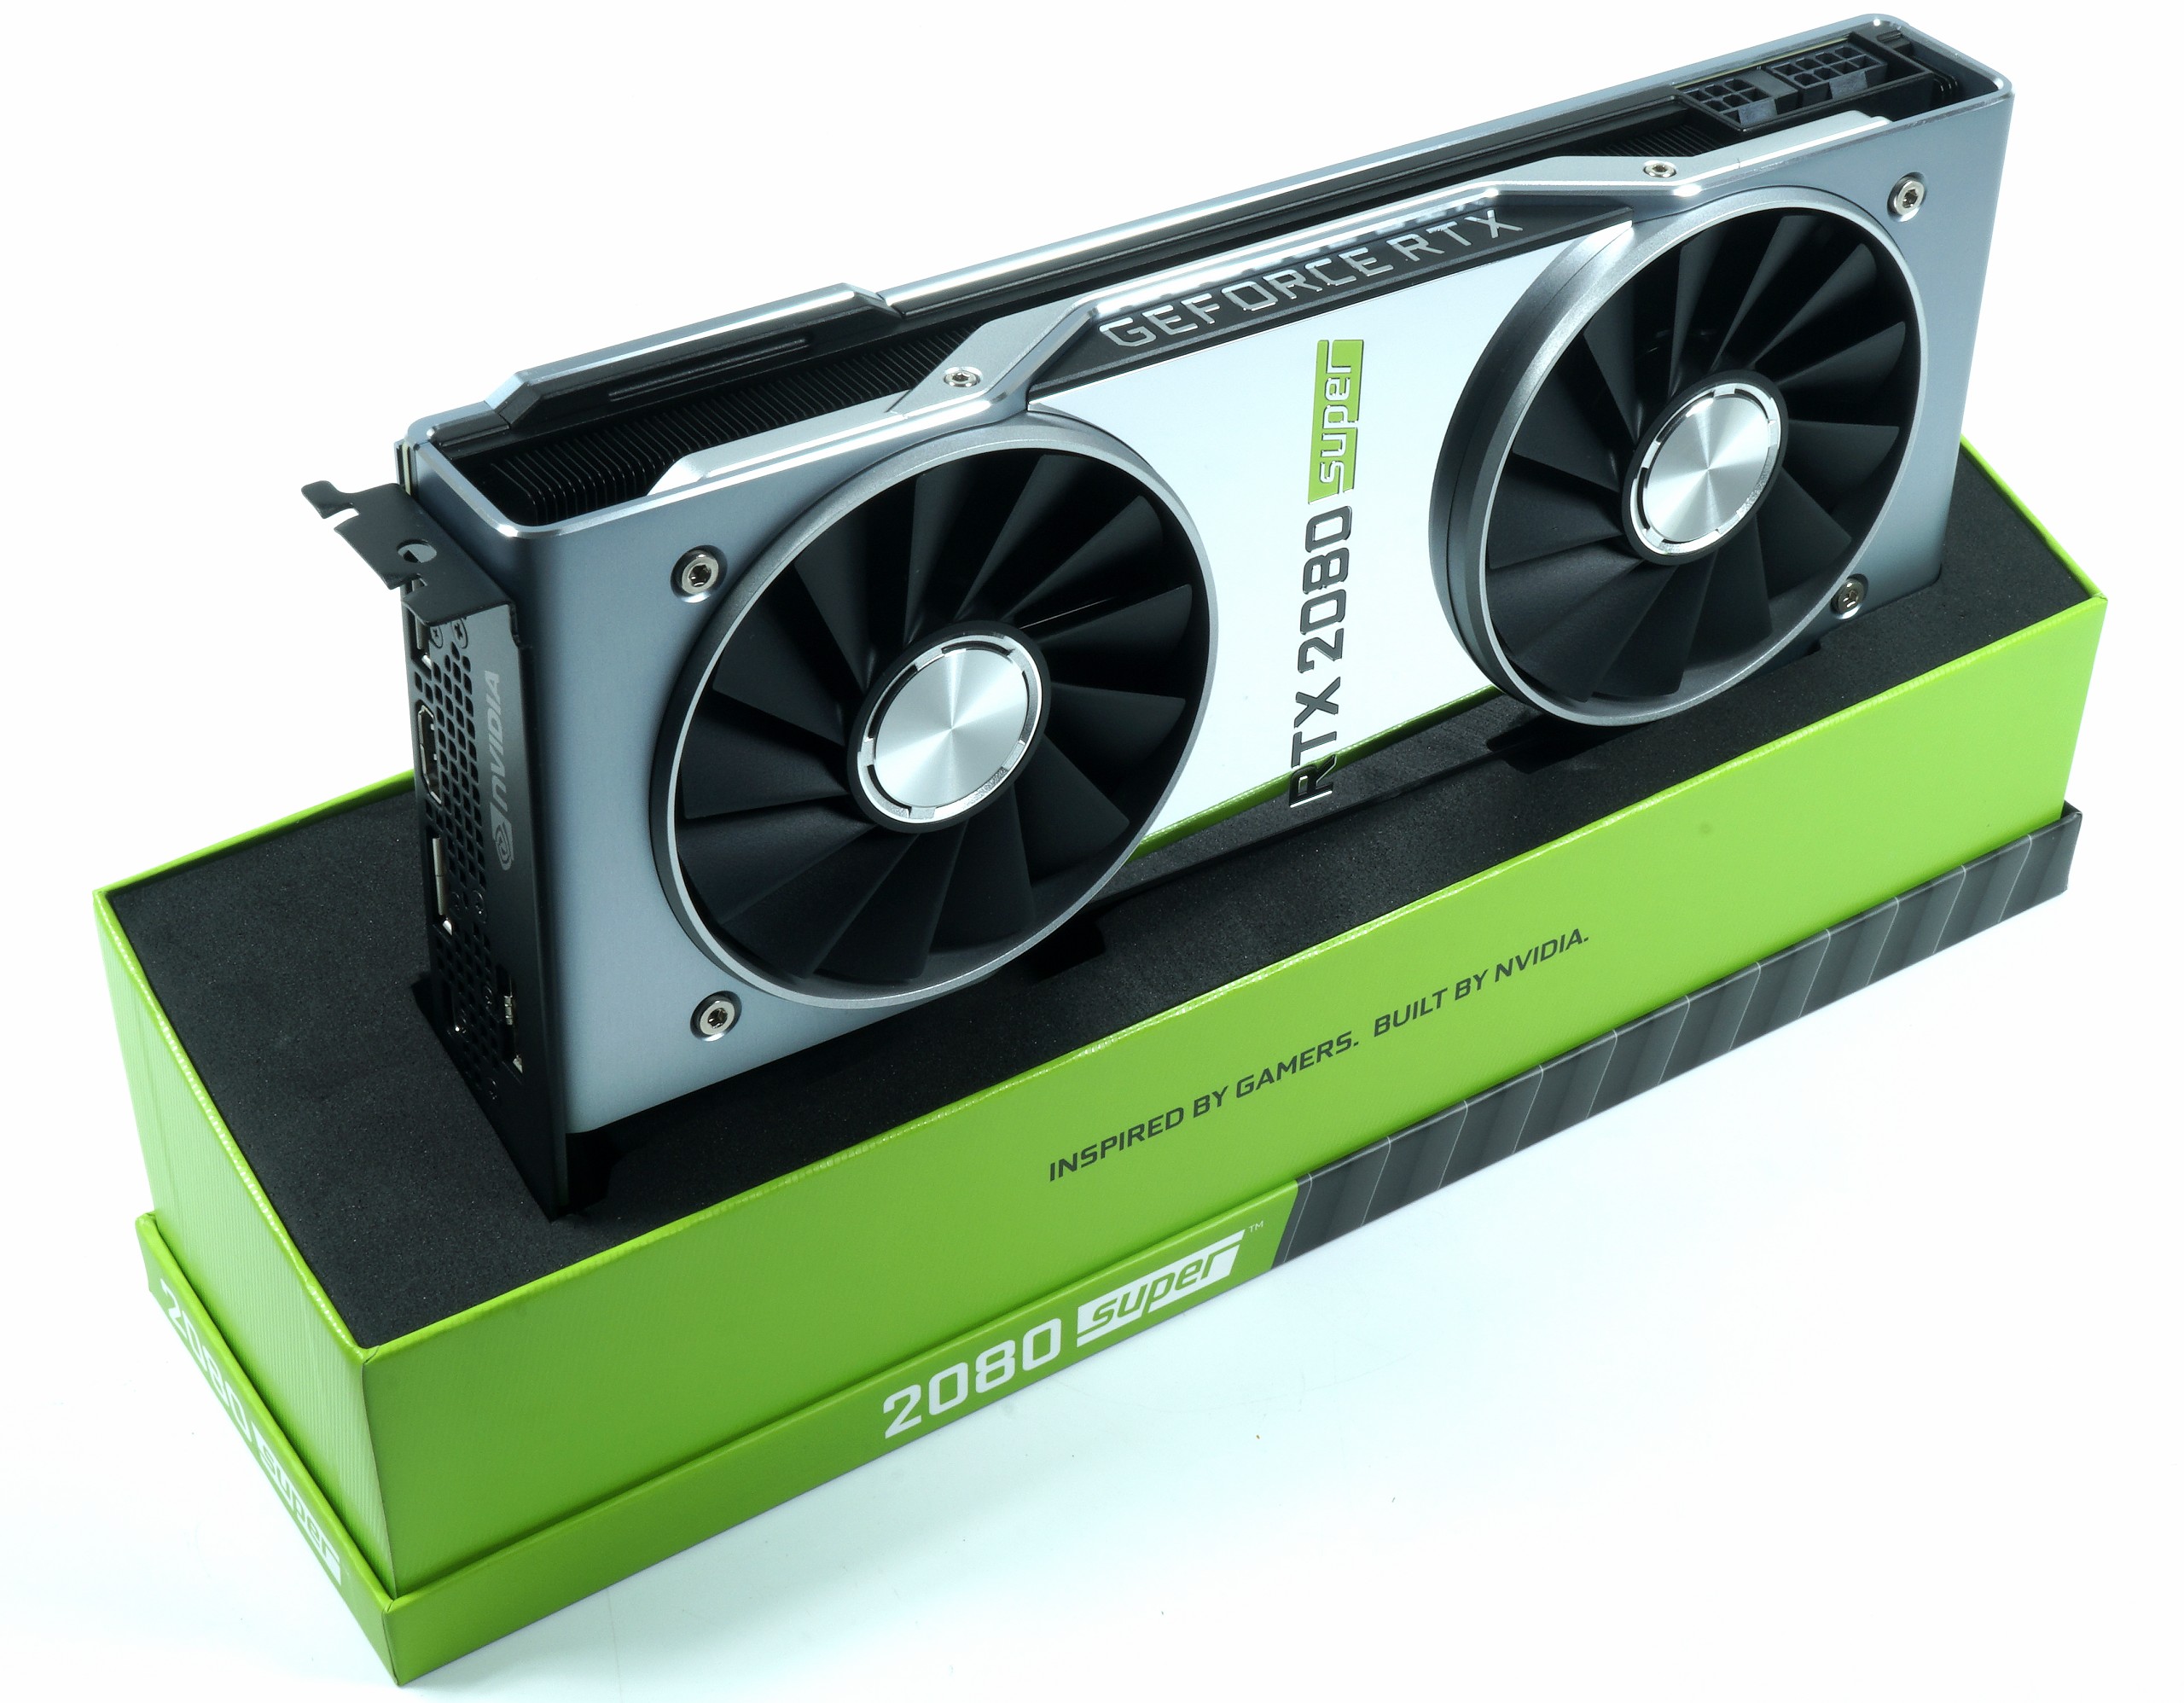 Nvidia GeForce RTX 2080 Super review - Real upgrade, small update